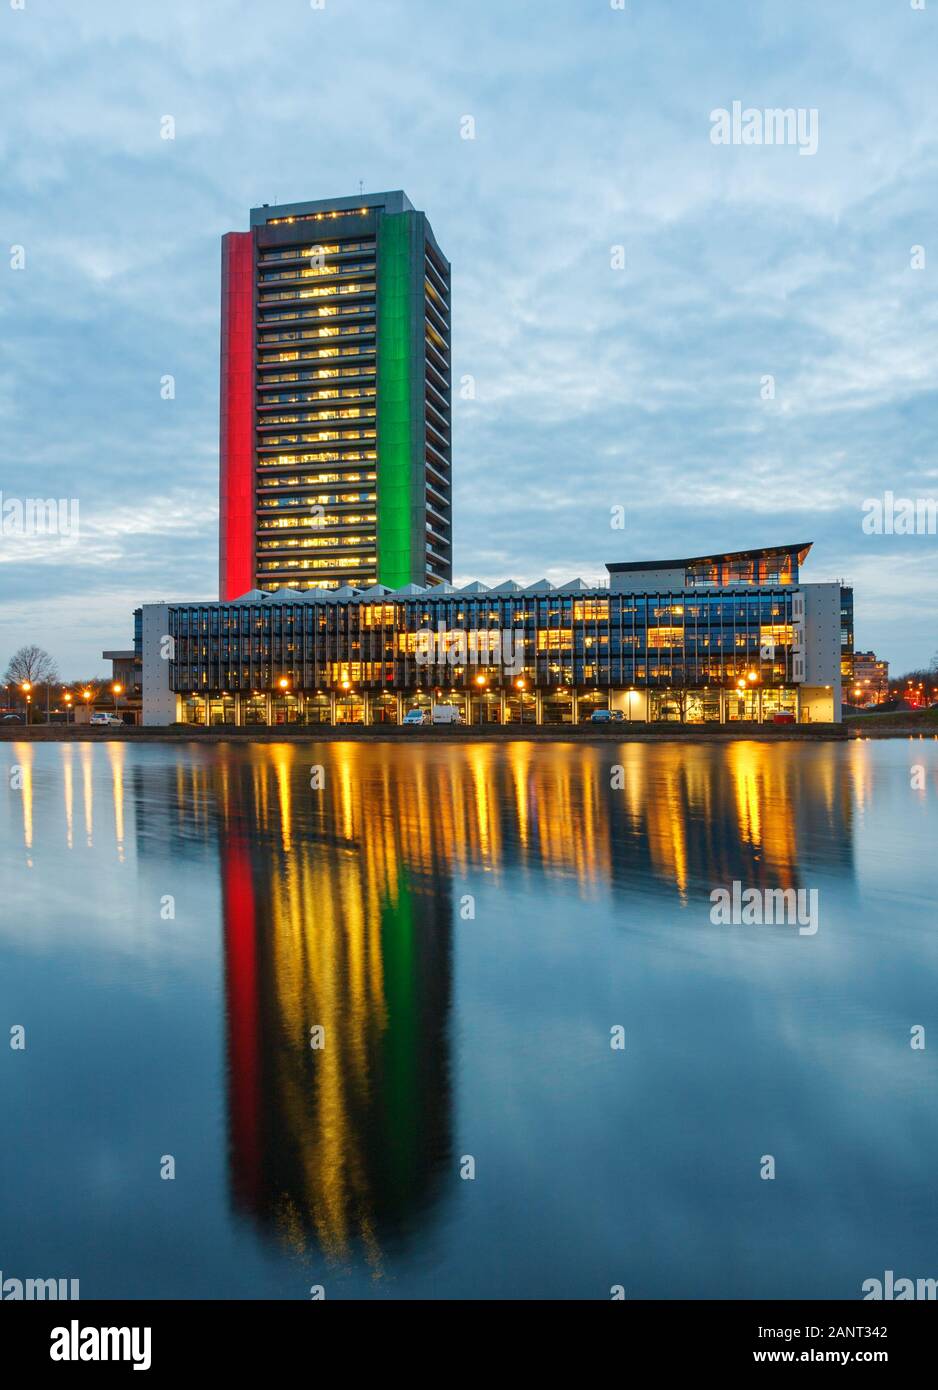 Provinciehuis (province house) North Brabant and its reflection in the water at sunset. 's-Hertogenbosch, The Netherlands. Stock Photo